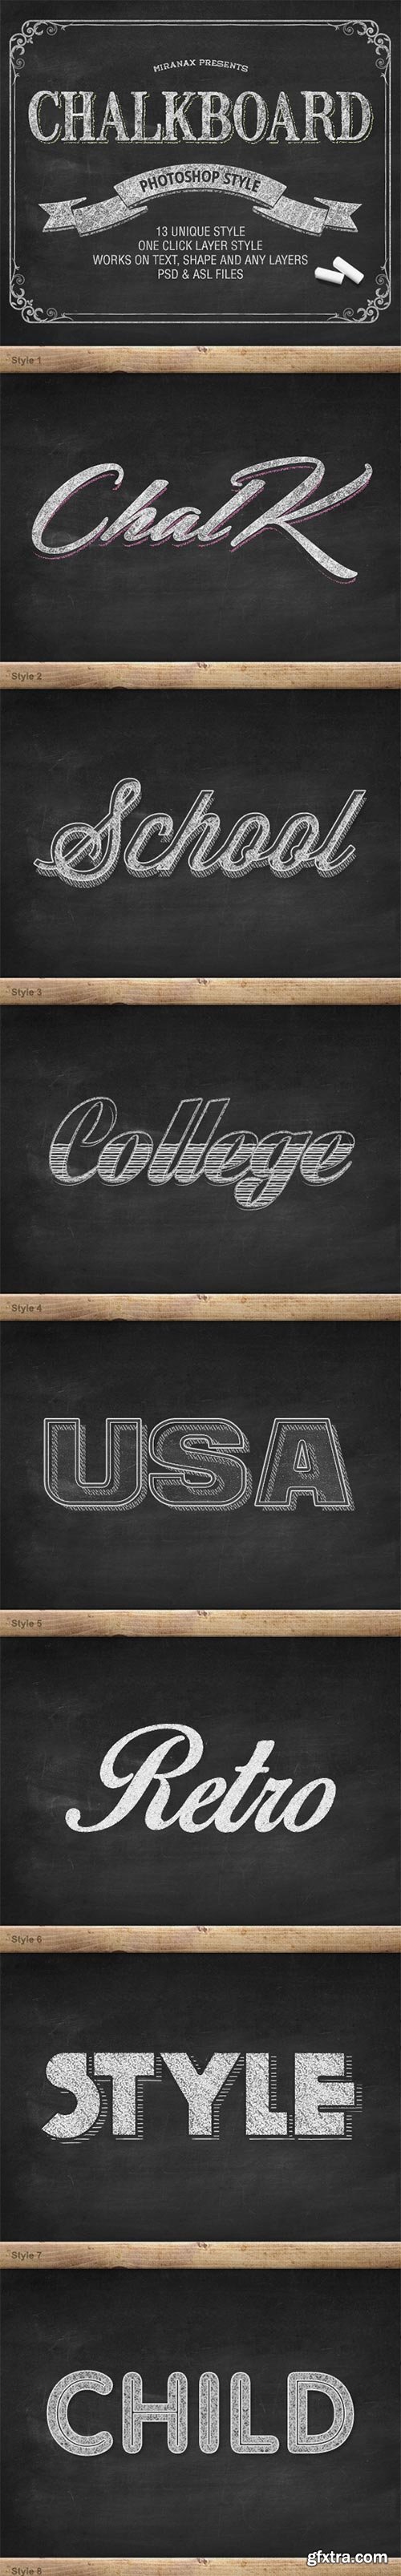 GraphicRiver - Chalkboard Photoshop PSD Layer Styles